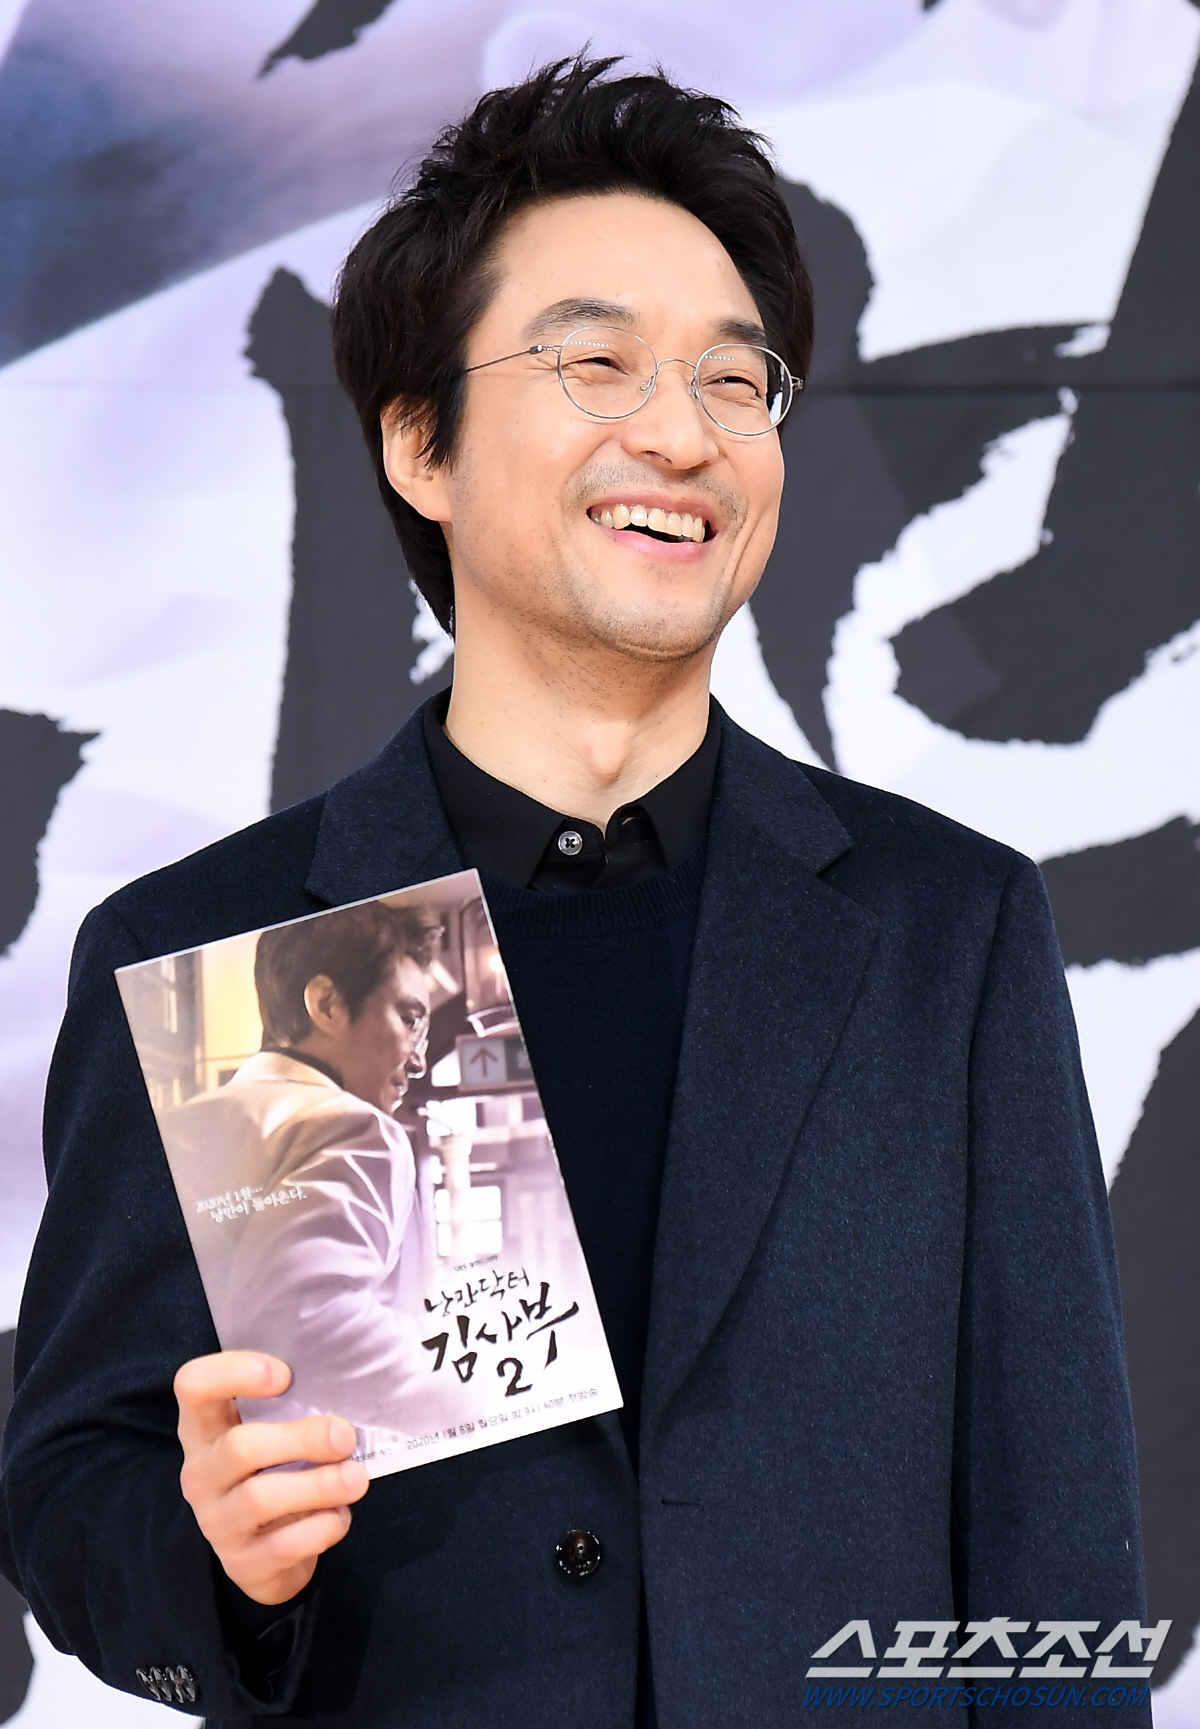 27.6%, the drama Romantic Doctor Kim Sabu, who collected viewers in front of TV, returns to Season 2 in three years.On the afternoon of the 6th, SBS New Moonhwa Drama Romantic Doctor Kim Sabu 2 (played by Kang Eun-kyung, directed by Yoo In-sik) was presented at the SBS building in Mok-dong, Yangcheon-gu, Seoul.The event was attended by Han Suk-kyu, Lee Sung-kyung, Ahn Hyo-seop, Jin Kyung, Im Won Hee, Kim Joo Heon, Shin Dong Wook, Yun Na, Kim Min Jae, So Ju Yeon and Yoo In Sik PD.Romantic Doctor Kim Sabu 2 is a drama that depicts the true romance of life as the second year of the cynical natural surgical genius surgeon who does not believe in happiness and the hard work genius who rethinks life again meets the geek genius doctor Kim Sabu, once called the hand of God.In season 1, Han Suk-kyu, Hyun Suk and Seo Hyun-jin appeared to record the highest audience rating of 27.6% (Nilson Korea, national standard), and Ahn Hyo-seop and Lee Sung-kyung will take over Baton in season 2.Yoo In-sik PD, who directed the season 1 after season 2, said, When I finished season 1 of Romantic Doctor Kim Sabu, I was busy and did not know it, and too many people loved this drama.So, after the end of season 1, Kang Eun-kyung and I thought that Medical Drama can not be done again. Everyone who met me had a story about Can not you do romantic doctor 2, and I had a happy memory of the process of making it. He said.I made it a gift that I want to give to everyone who missed Season 1.Of course, after making it, I thought that medical is also difficult, but I think that the warmth of Season 1 and the longing for Doldam Hospital through this drama will be a good feeling for viewers. Han Suk-kyu, the center of season 1 and season 2, said: It was really good in season 1 and I was really sorry when I broke up and I always wanted to see it.I will see viewers with a good story. Is there a difference only in the overflowing medical drama Romantic Doctor? Han Suk-kyu said, We want to know that our drama is dealing with stories outside the hospital.If we deal with the work in the hospital in other medical dramas, we will be able to solve the problems of 2020 through the relationship between people, patients, doctors, and doctors through Doldam Hospital and the patients metaphorically. He said.Kim Sa-bus struggle to establish a Korean emergency trauma center will be drawn. In this process, he reminds me of Professor Lee Kook-jong, a real person.In particular, Yoo In-sik PD said, The place called Doldam Hospital is actually a hospital that is difficult to exist.All of the medical staff, including Kim Sabu, in the hospital, are working hard to cope with all the patients who come in.It is a hospital that I want to be somewhere in Doldam Hospital, and the people who work here are very stupid romanticists. It has been about three years since season 2, and the pressure to push in from the big hospital and new advice come to Doldam Hospital.There is a difficult moment to see if the difficulties that come from the system of maintaining the hospital in the hospital can maintain their beliefs.It is too difficult to find a solution there.I thought that one Drama could not solve it, but the process of finding the answer in the drama desperately is the maximum message we can finally give.I can not really put all the stories outside the hospital, but I tried to reflect the troubles of the professionals living in the present age. The growth of newly joined Ahn Hyo-seop and Lee Sung-kyung is also a point of observation for the Romantic Doctor; it is true that Ahn Hyo-seop became a burden as a season one listener.But I was burdened and my body was getting harder.So the burden sublimates into passion, and the past is past, so I want to show you as hard as possible and show you a good picture. As an actor, I am really learning too much from Han Suk-kyu and my mentor.You may not know it, but its like a love affair alone. You also tell me a lot about your acting attitude, and if you listen to your words, you have a lot to learn and laugh.I think its fun and an honor to be with you, he said.Lee Sung-kyung said, When we first gathered together, the words that the old-fashioned seniors told the members of the new wall were Do not bear.In fact, as well as Doldam Hospital, my seniors are so warmly welcomed and taught me to shoot. It was a work with the best actors in the past.It is not enough because the character called Eunjae is a character made as a proper doctor as a person, but it seems to grow with the character in the stone wall. Romantic Doctor Kim Sabu looks back on the pain of modern people through the hearts of sick patients in Season 2 following Season 1.Han Suk-kyu said, Through the stories of people who are injured, I do not know why we are hurt, how to fix this, why I am hurt and how to fix it.So, viewers would have had a lot of sympathy through Kim Sabu, but it is still frustrating to see how much better it has been three years later.We all talked about the fact that we didnt want to pick up the second season because it was good for season one, and this time we started with a more modest mind to look at the problem.I will do my best with honesty and humility. However, there was a burden because Season 1 wrote 27.6% of the previous ratings history.Yoo In-sik PD said, Since I received so much love in Season 1, I do not feel burdened when I make Season 2.The ratings have changed so much that if you expected the same number or glory as Season 1, Season 2 would not have started because it was burdensome.I did my best to revive the air, atmosphere and feelings that viewers felt in Season 1 than the figures.If all the props in the Doldam Hospital set are not searched for in the warehouse and come to ancient times, the upgrades will be upgraded, and the Gudoldam members have struggled to recall the character of Season 1, the atmosphere and the feeling, and it is simplest to tell them that new air will come into the atmosphere of Season 1 because new families come in and new troubles and guests come. Lee Sung-kyung, who first joined the season 2, said, The character of Cha Eun-jae and Seo Woo-jin first came to the stone wall and adapted to it.Those who came to the stone wall will be happy to see the work, and there will be some people who are in contact with the stone wall for the first time. I would like to see them adapt together and fill the character with the hope that they will adapt together. Ahn Hyo-seop said, My friend Woojin is a friend who spent his childhood through hardship and adversity.The wall about the world is thick and there are many scars, and the process of growing this friend is evident.I think there are some people who are as hard as Woojin, some people who are less difficult than Woojin, and many people who are hurt.I think it will be comforting and healing together while I see Woojin. Lim Won-hee, who is in the season 1 and season 2, said, It has become more compressed and bigger. Jin Kyung said, The script was good for season 1, but the writing power is fun to keep an eye on every episode.For example, if society is a rock, it is like hitting a rock with eggs, and I felt that the depth of Kim Sabus troubles was much deeper than Romantic Doctor 1.How will Kim respond to this situation? How to cope is very curious.I will confidently say that Drama is more impressed than Romantic Doctor 1. Romantic Doctor Kim Sabu 2 made a bold attempt to increase the time of the project to 80 minutes. It is hard, but our drama is 90% in the studio.Medical Drama has a hard point, but there is no travel time, so it is dense and the hands and feet are well hit, so the staff becomes anti-medical and those who provide medical advice become anti-staff.Its hard to flip, because we dont have time to move. Were adapting as hard as we can, because we have to do dense filming.I think it will be a mission clearer if I go to this pace because the shooting is going smoothly. Finally, Yoo In-sik PD said, I tried not to miss the reason why those who loved Romantic Doctor loved.Medical Drama, but I tried to put a lot of attractions, professional treatments, and surgery processes into a more exciting way than Season 1.You will be able to see the glittering actors through this drama. Han Suk-kyu also mentioned the lives of his junior actors and said, I hope it will be a work of the place where their pain is covered. Lee Sung-kyung said he wants to concentrate on healing from the power of empathy.Romantic Doctor Kim Sabu 2 meets viewers at 9:40 pm on the 6th.